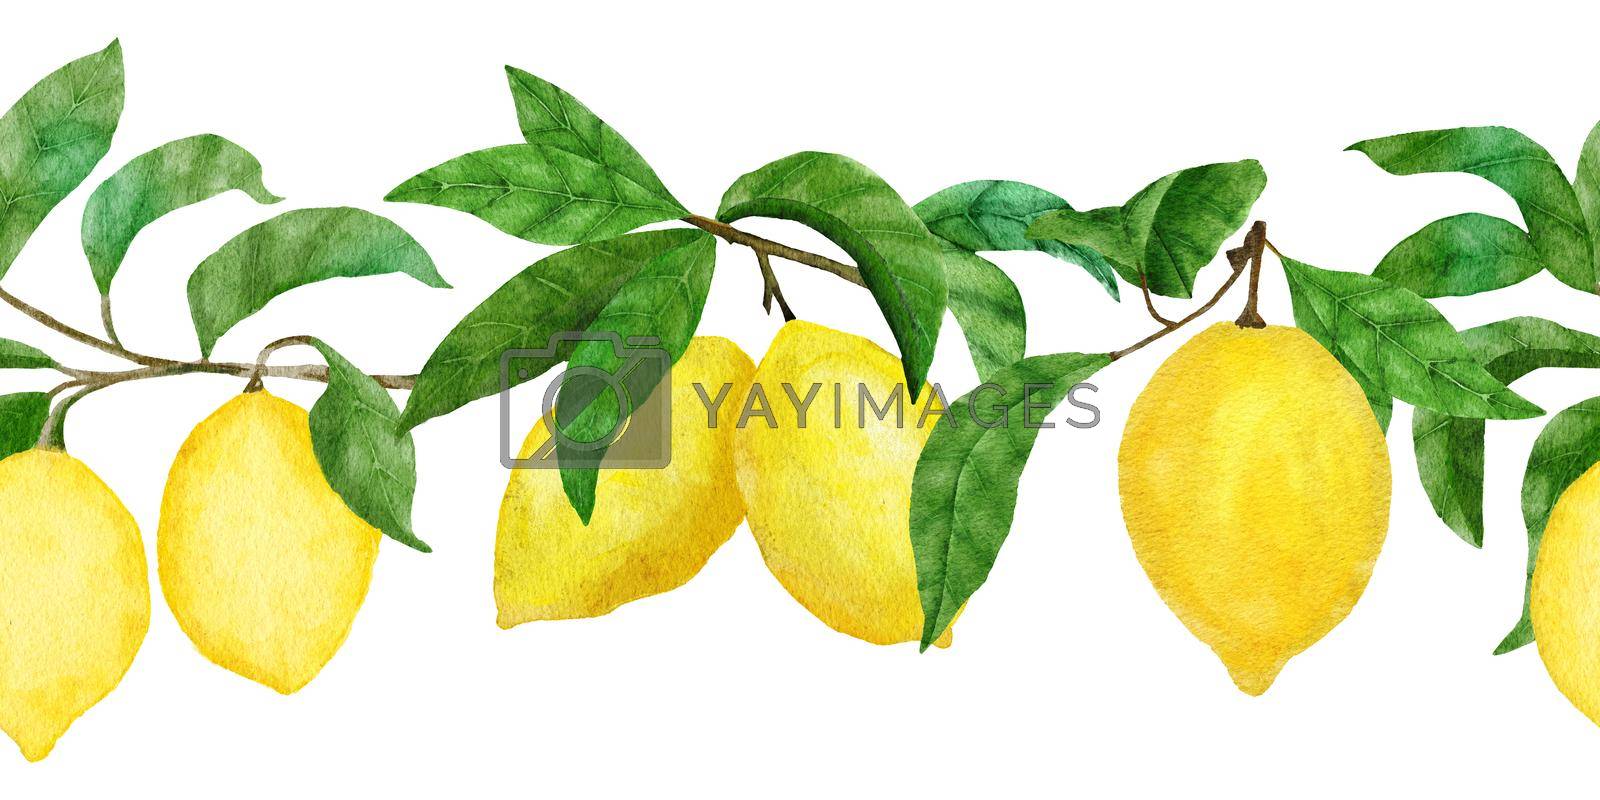 Royalty free image of Hand drawn watercolor seamless border with yellow citrus lemons. Bright summer holiday vintage frame, tasty fruit healthy juicy ripe. by Lagmar